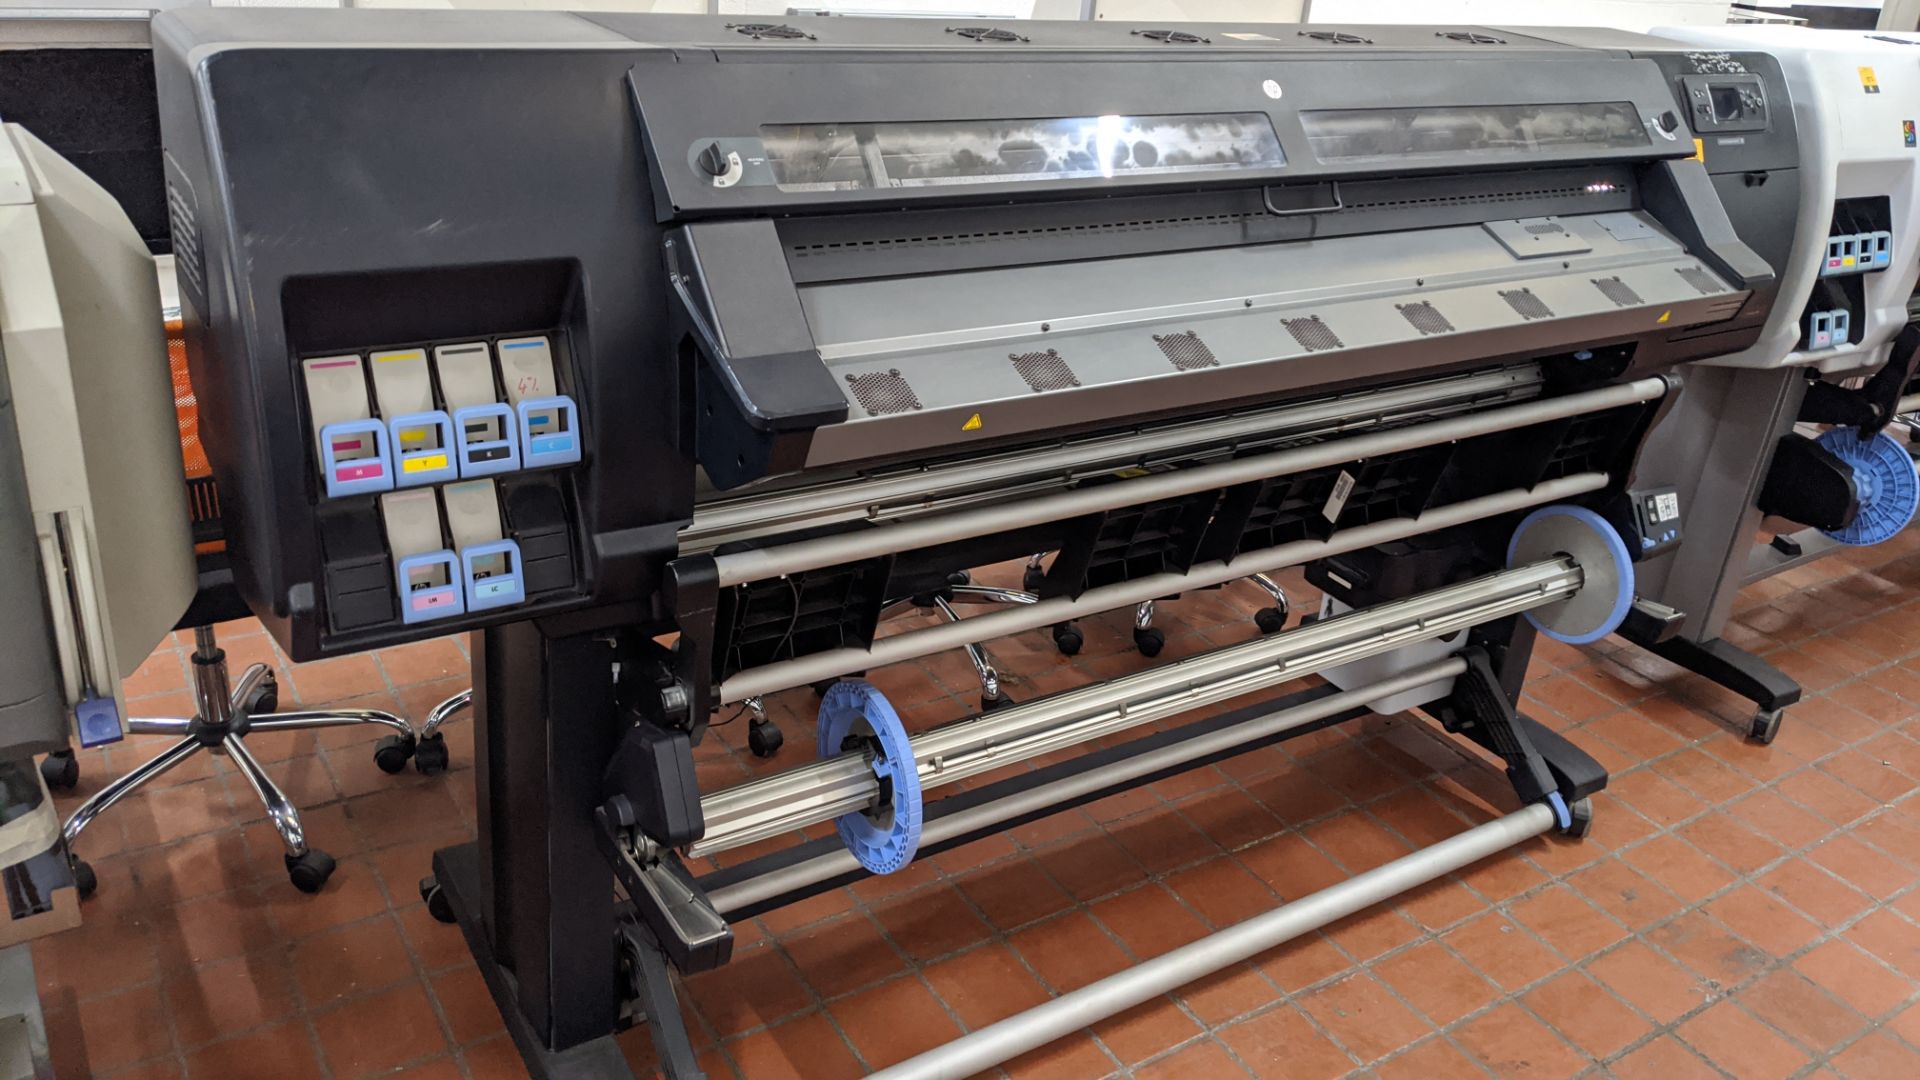 HP latex 260 (HP DesignJet L26500) wide format printer, product number CQ869A (61" capacity). - Image 5 of 9